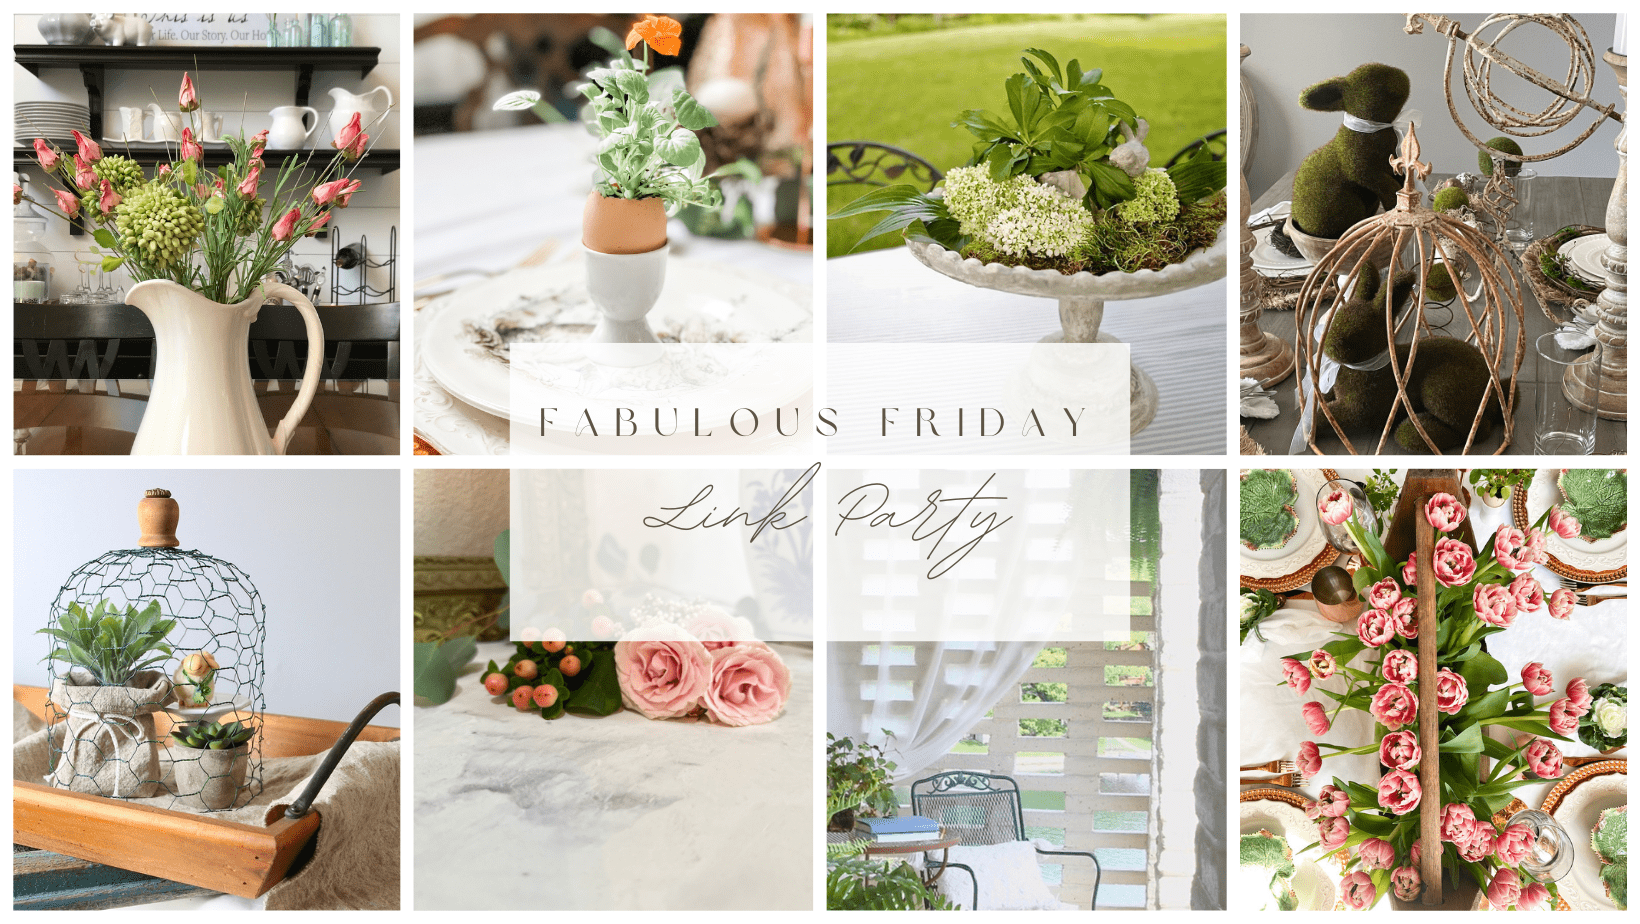 Fabulous Friday Link Party 3.31.23